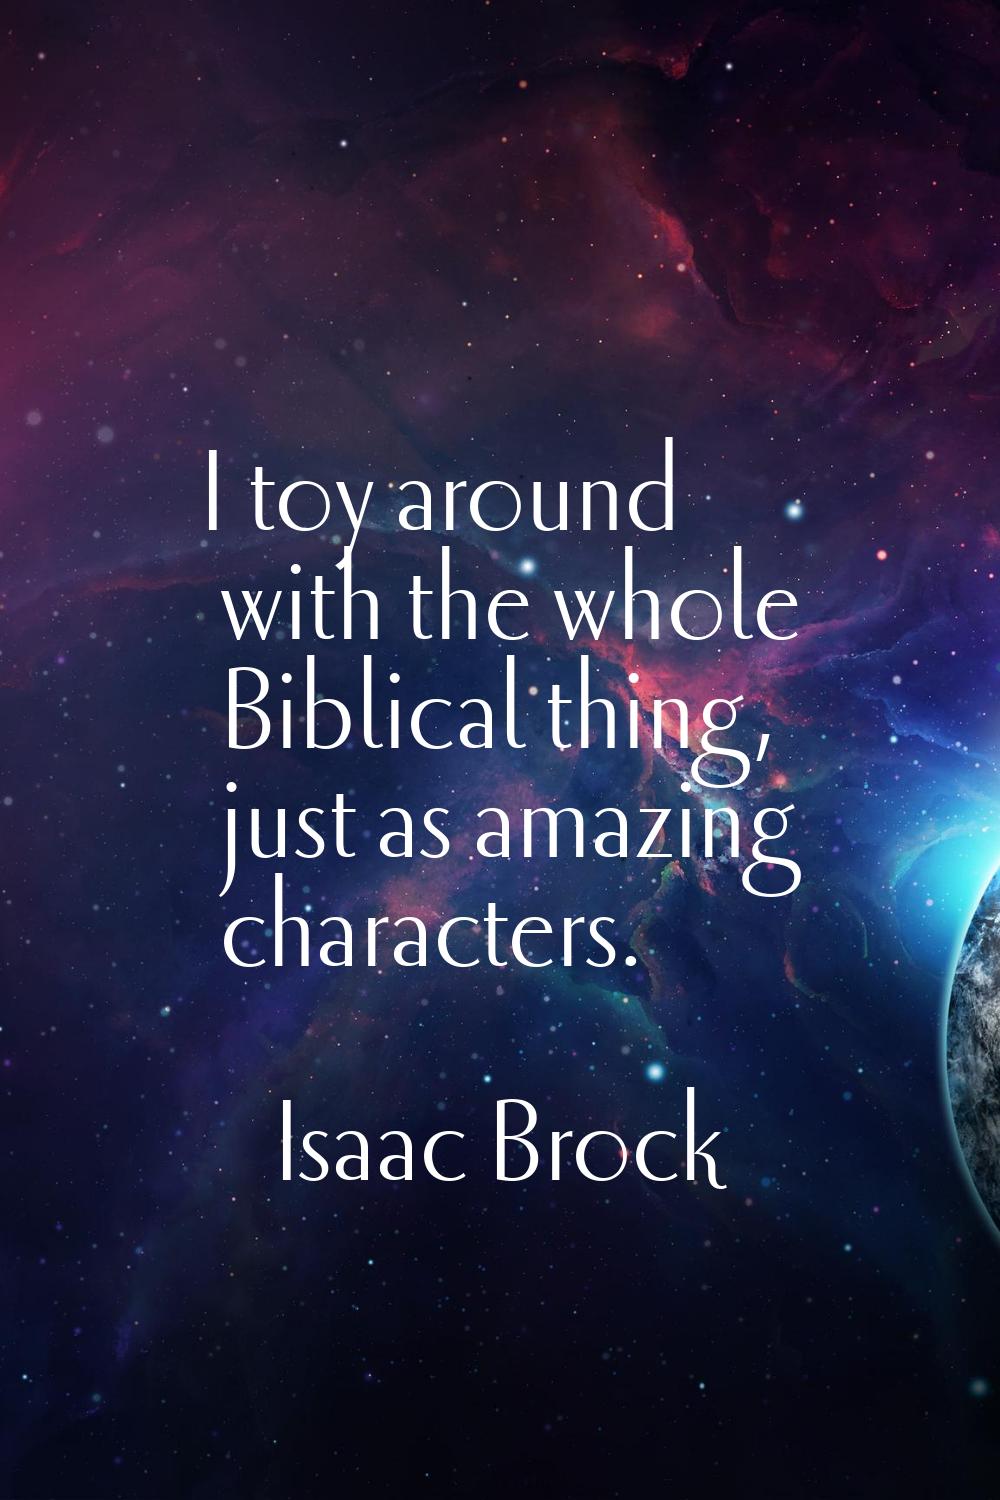 I toy around with the whole Biblical thing, just as amazing characters.